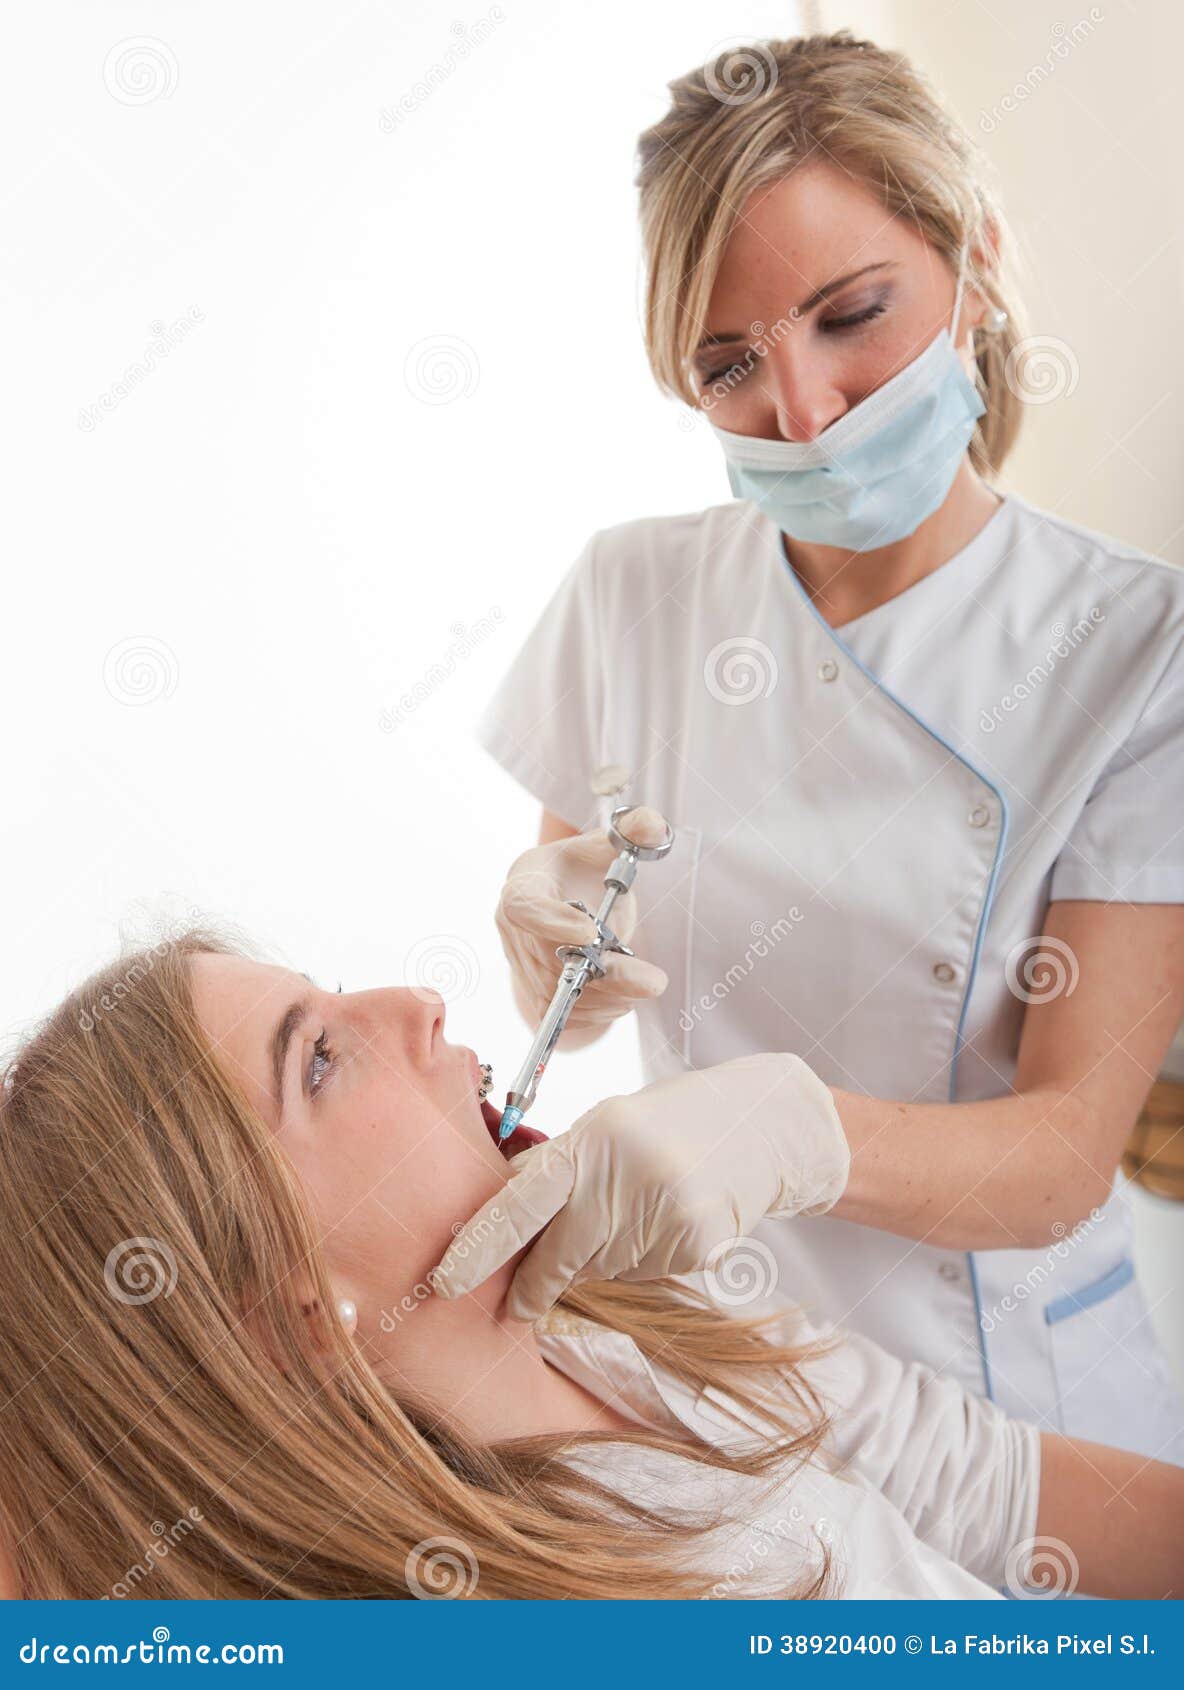 teenager at the dentist